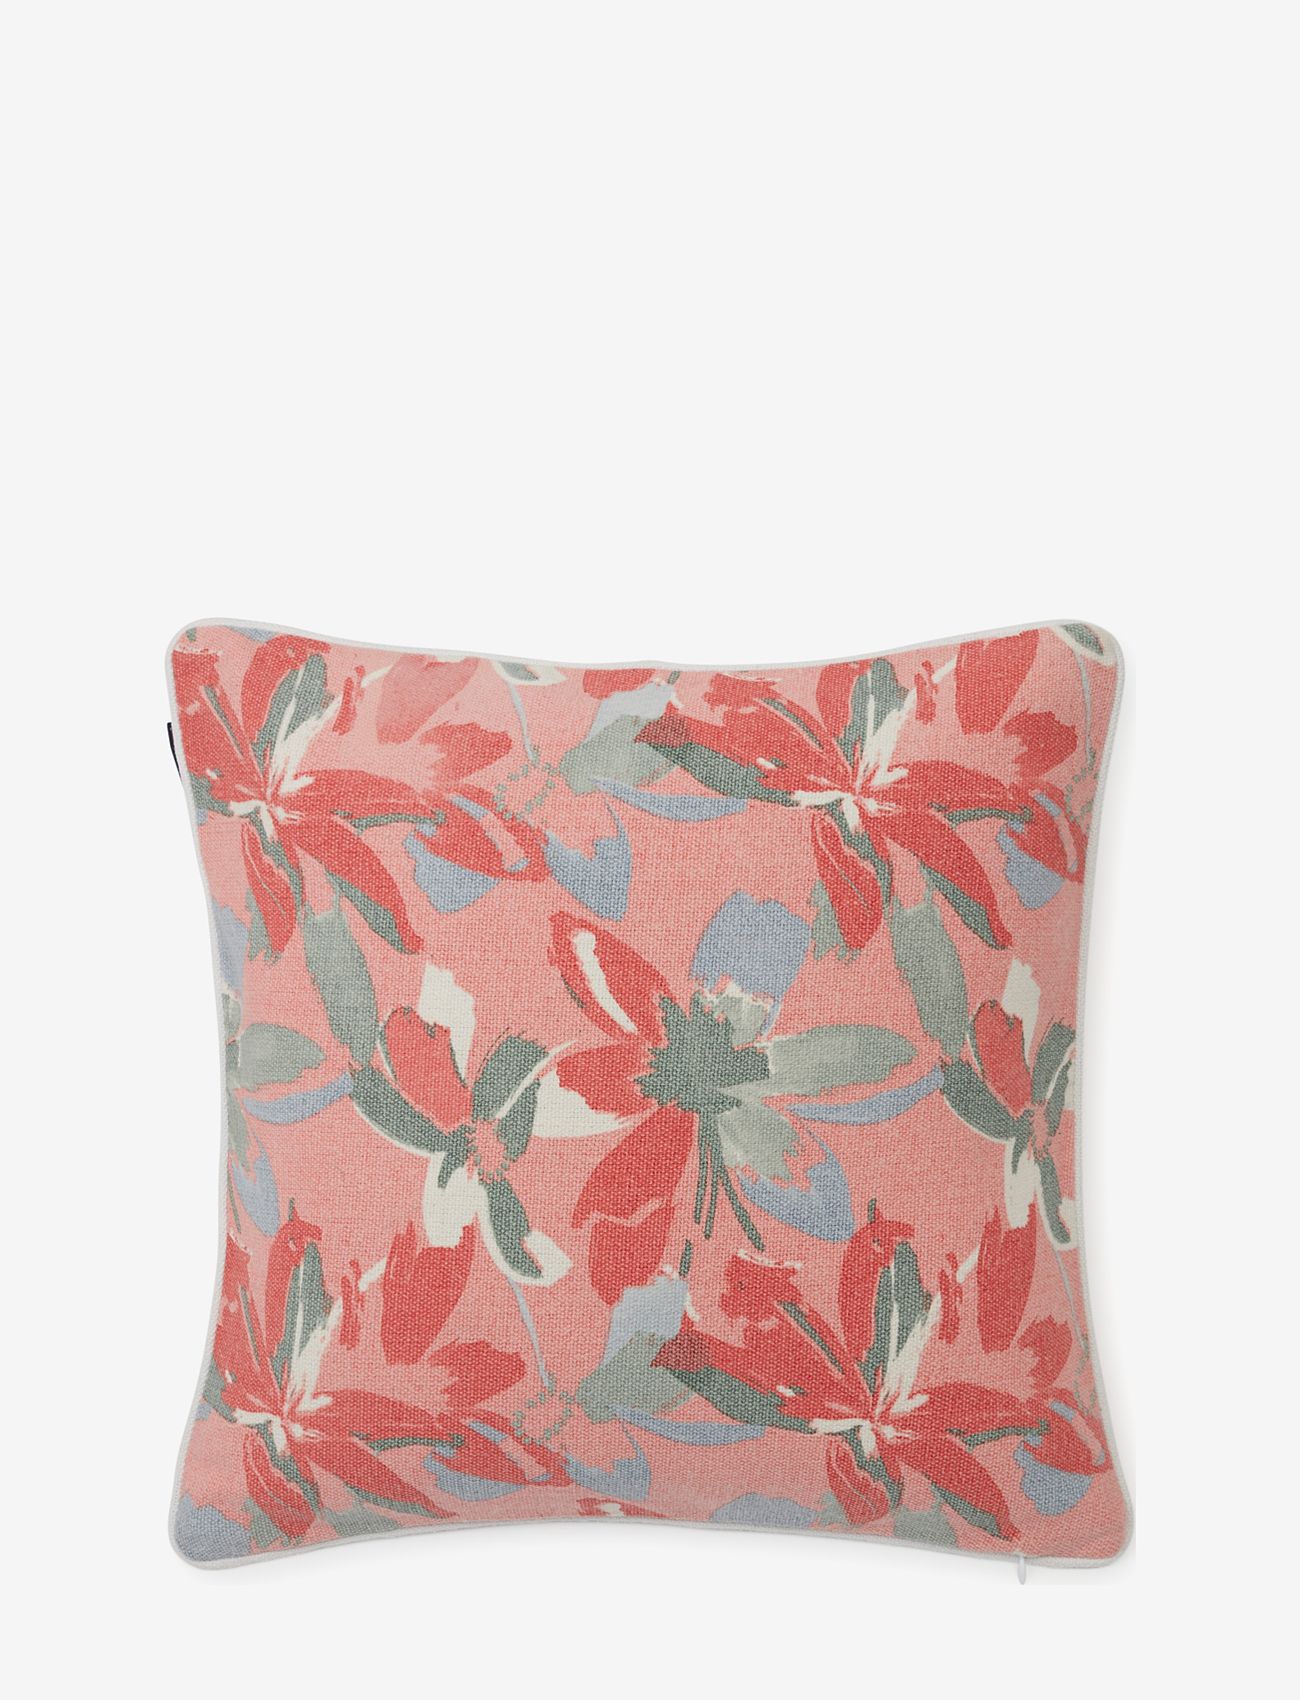 Lexington Home - Flower Printed Recycled Cotton Canvas Pillow Cover - padjakatted - coral/blue - 1